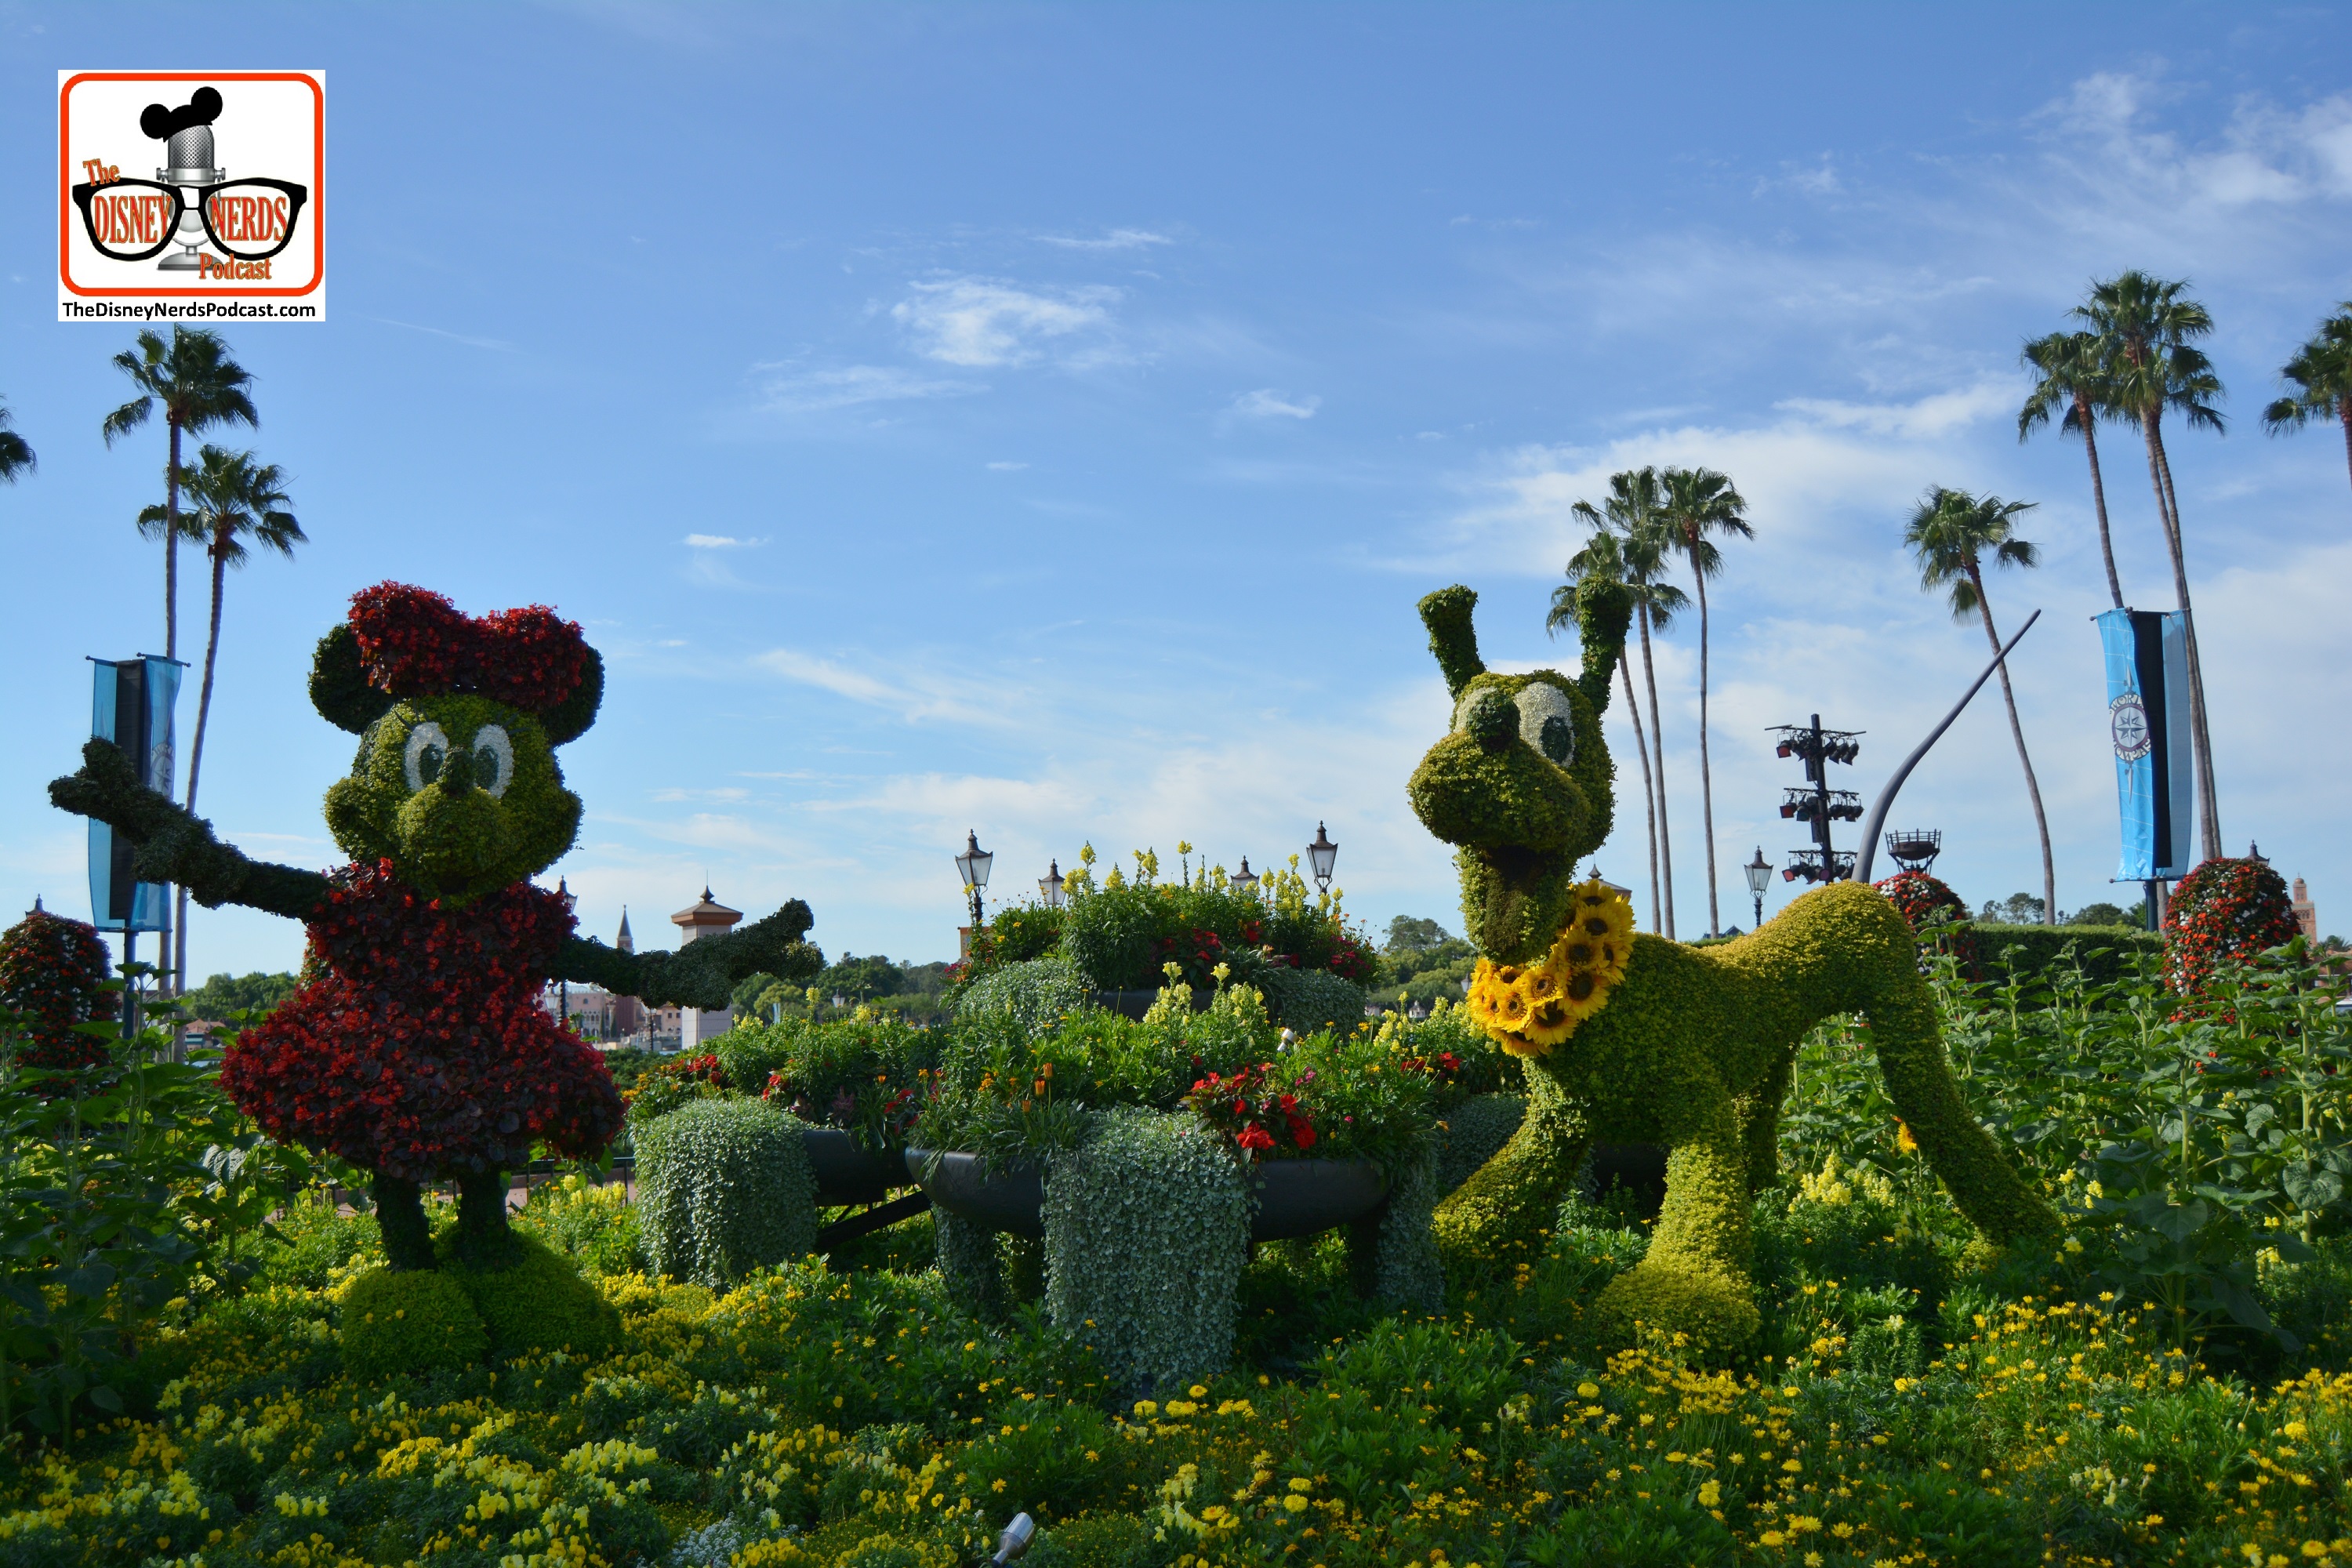 DNP April 2016 Photo Report: Epcot Flower and Garden Festival. Minnie and Pluto in Showcase Plaza